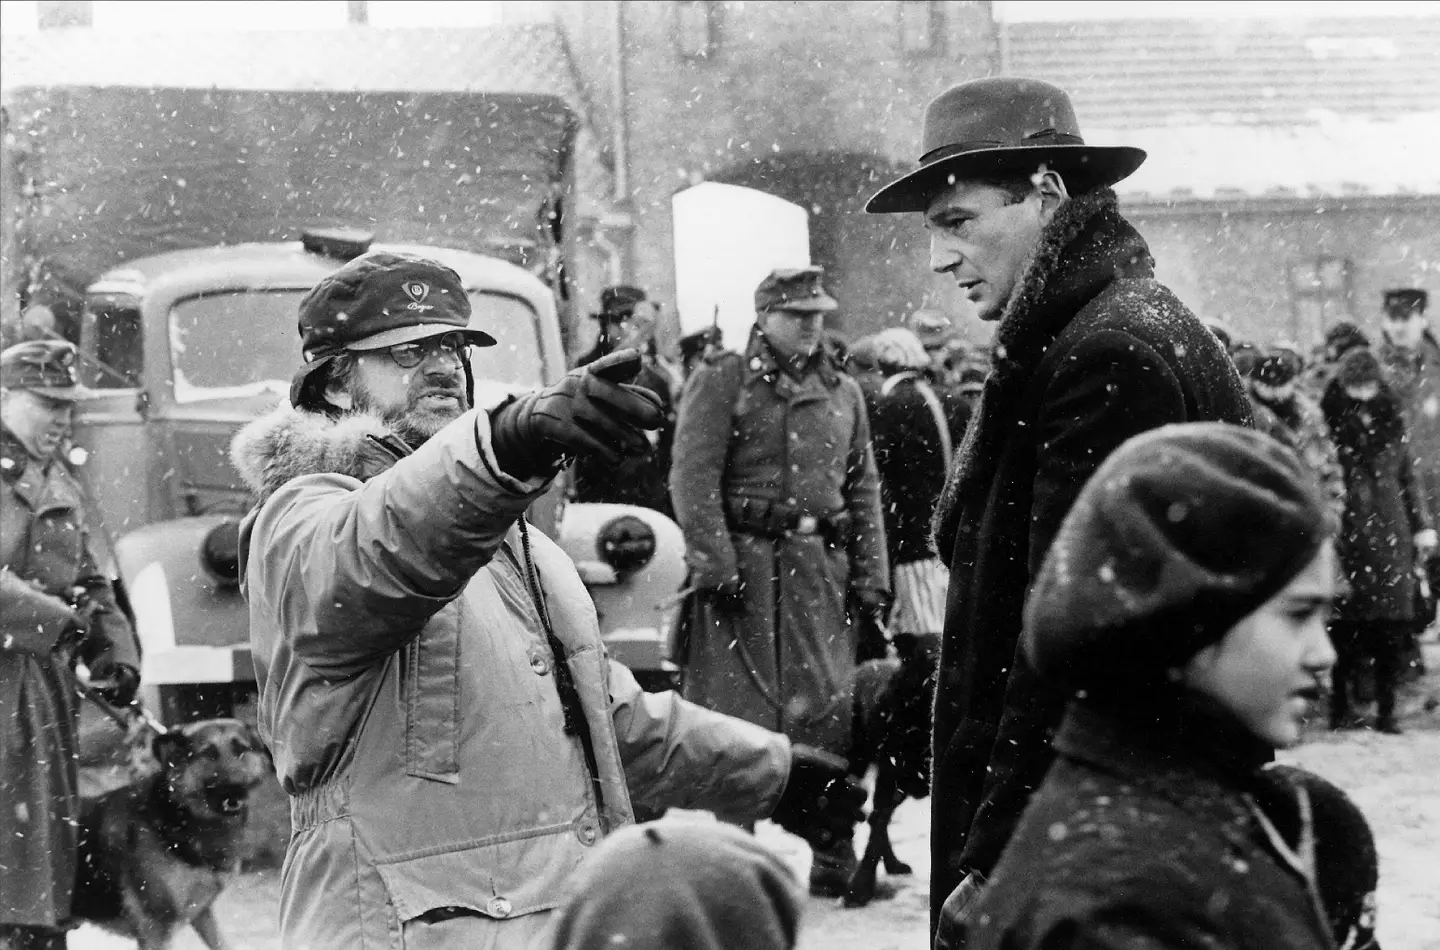 It was during filming for Schindler's List that Spielberg knew what he wanted to do with the money he'd have received from the movie.